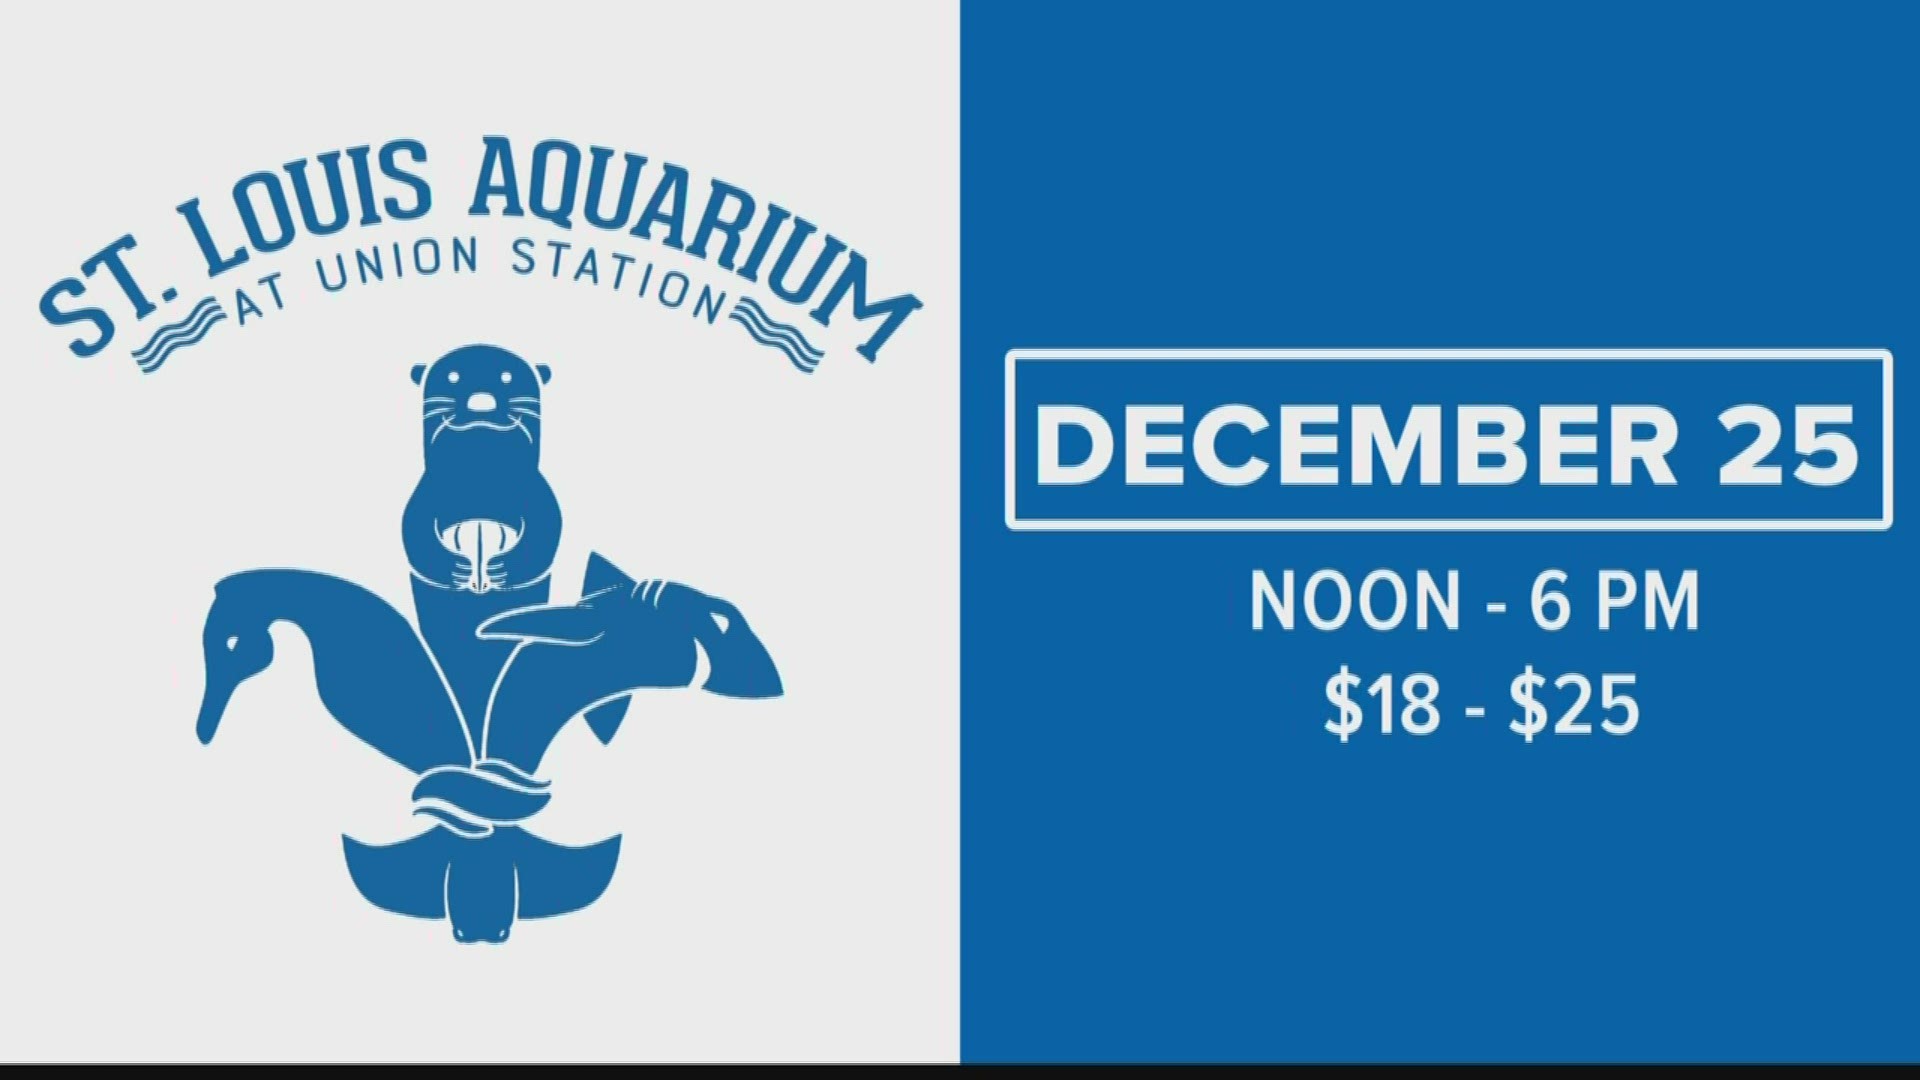 The hours the aquarium will be open on Christmas will be from noon to 6 p.m.